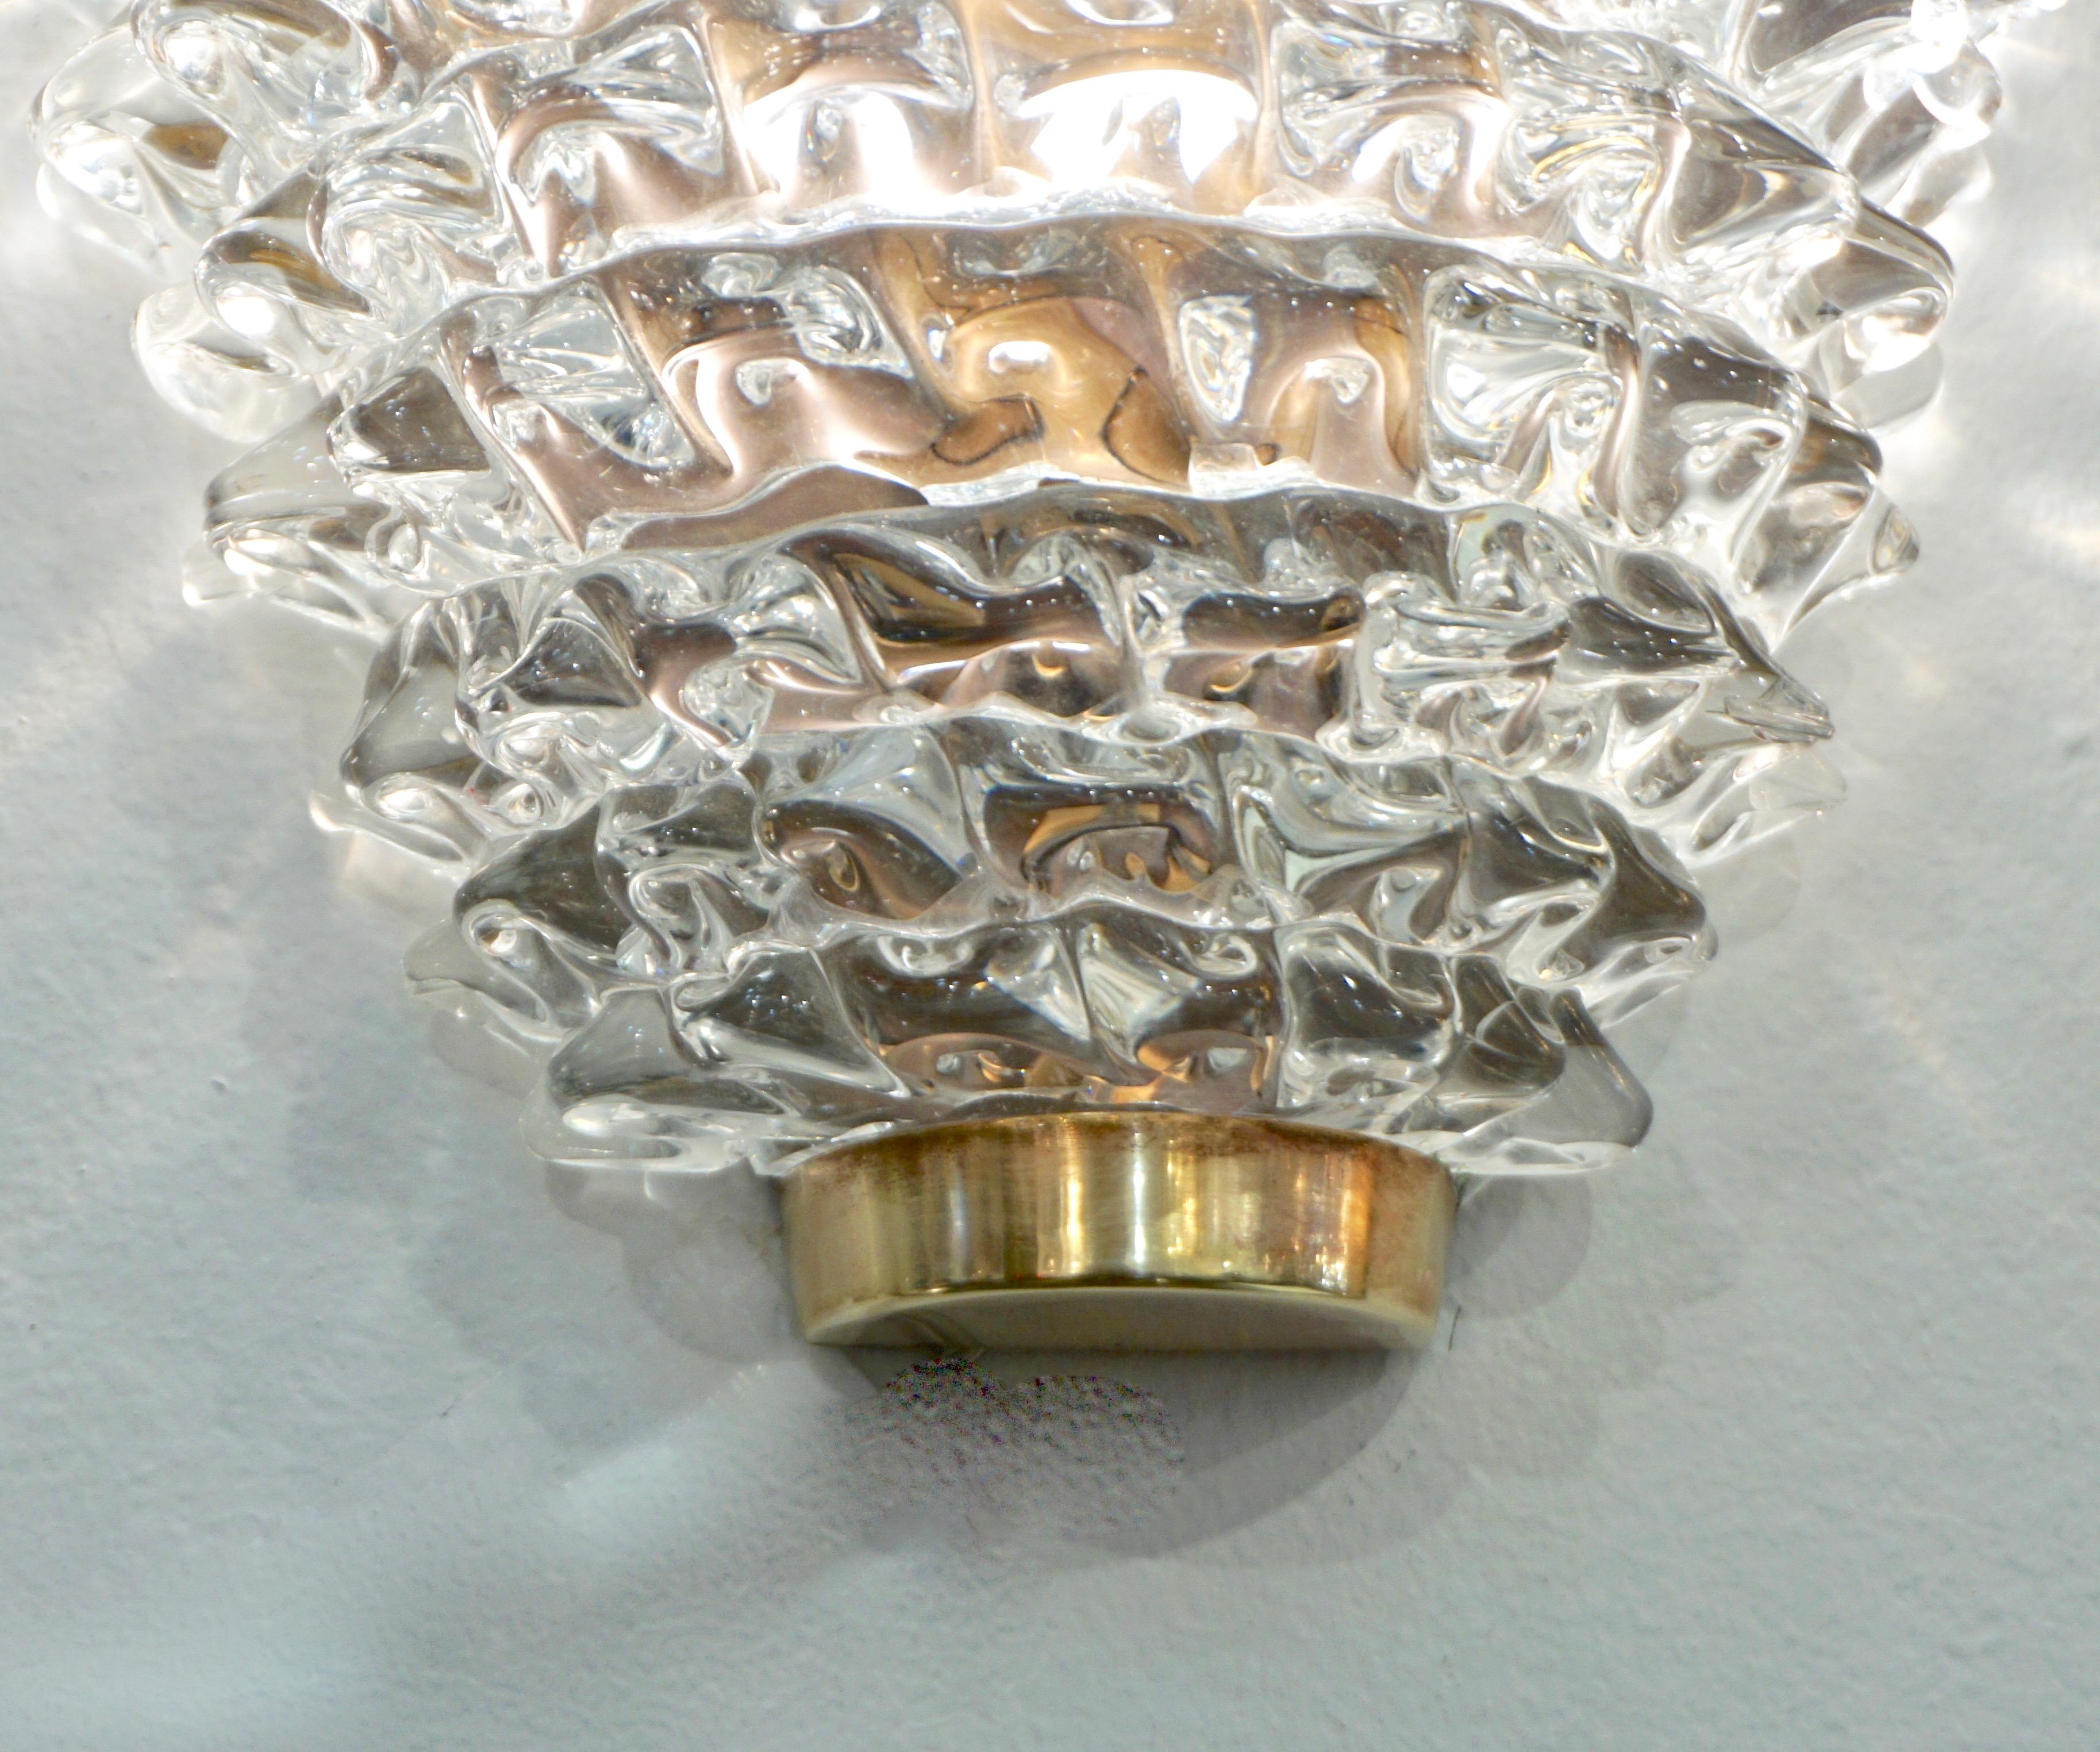 Organic Modern Contemporary Italian Brass & Crystal Rostrato Textured Murano Glass Sconces For Sale